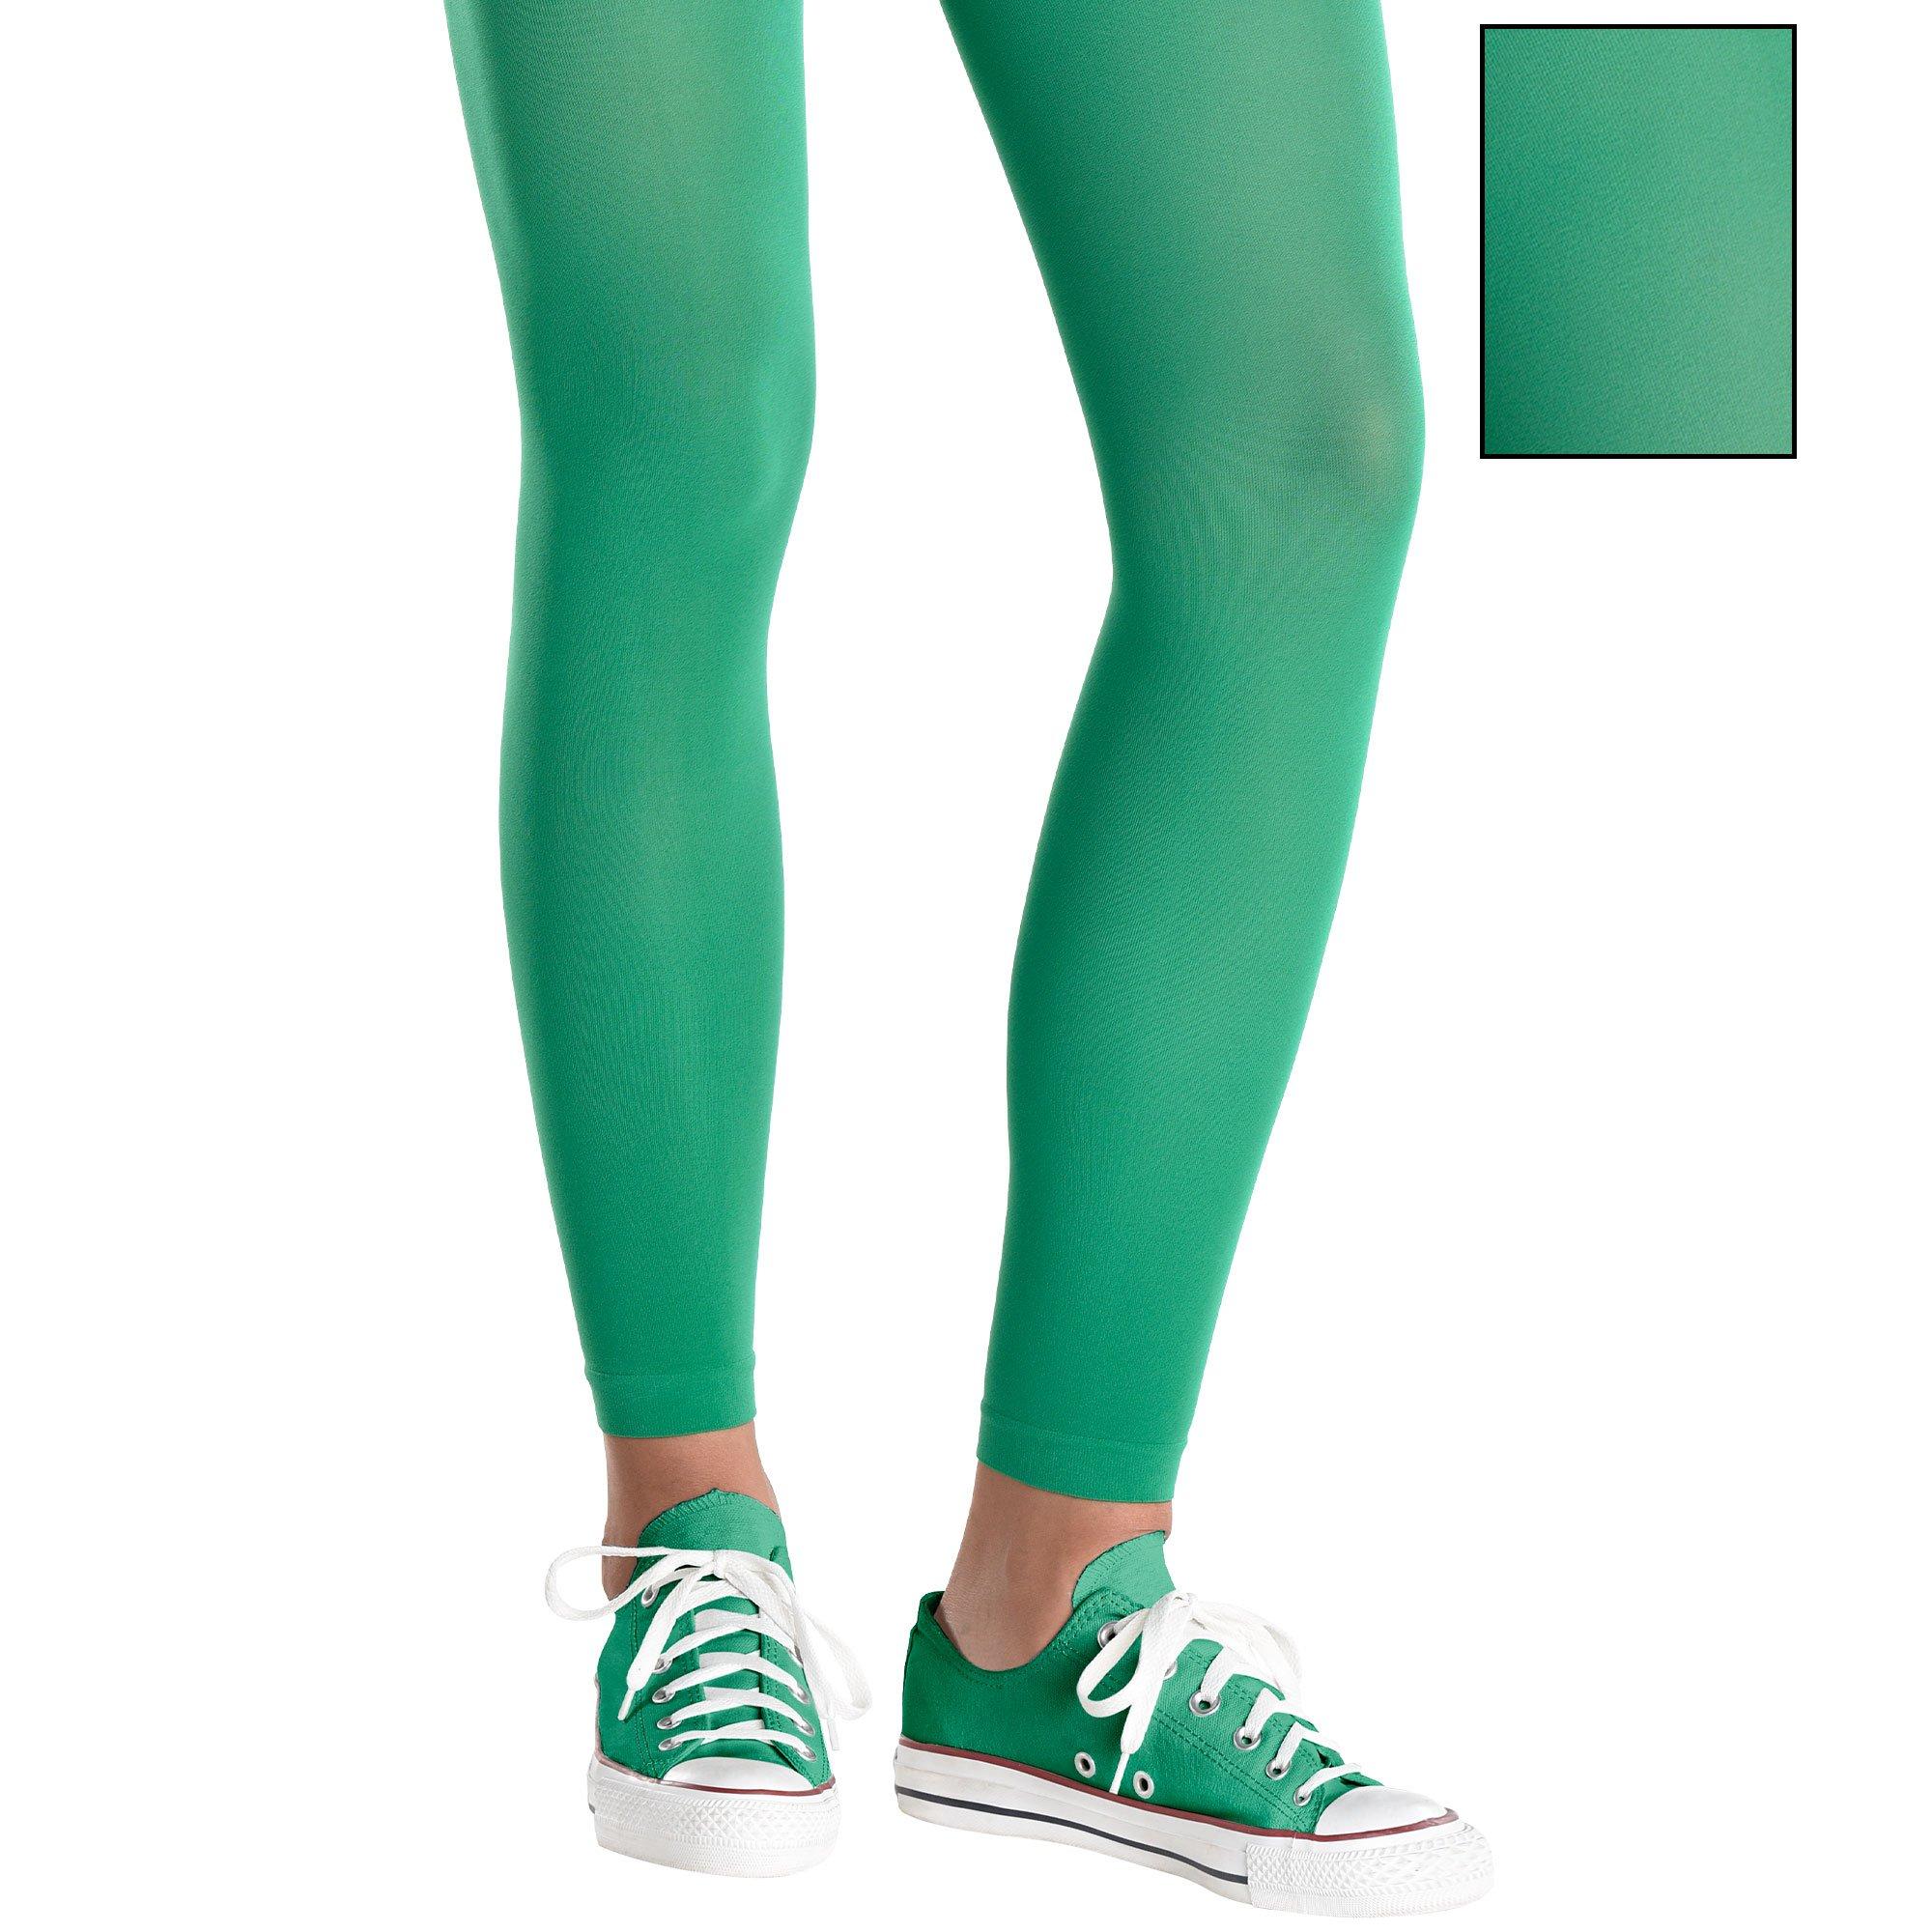 Opaque Green Colored Tights